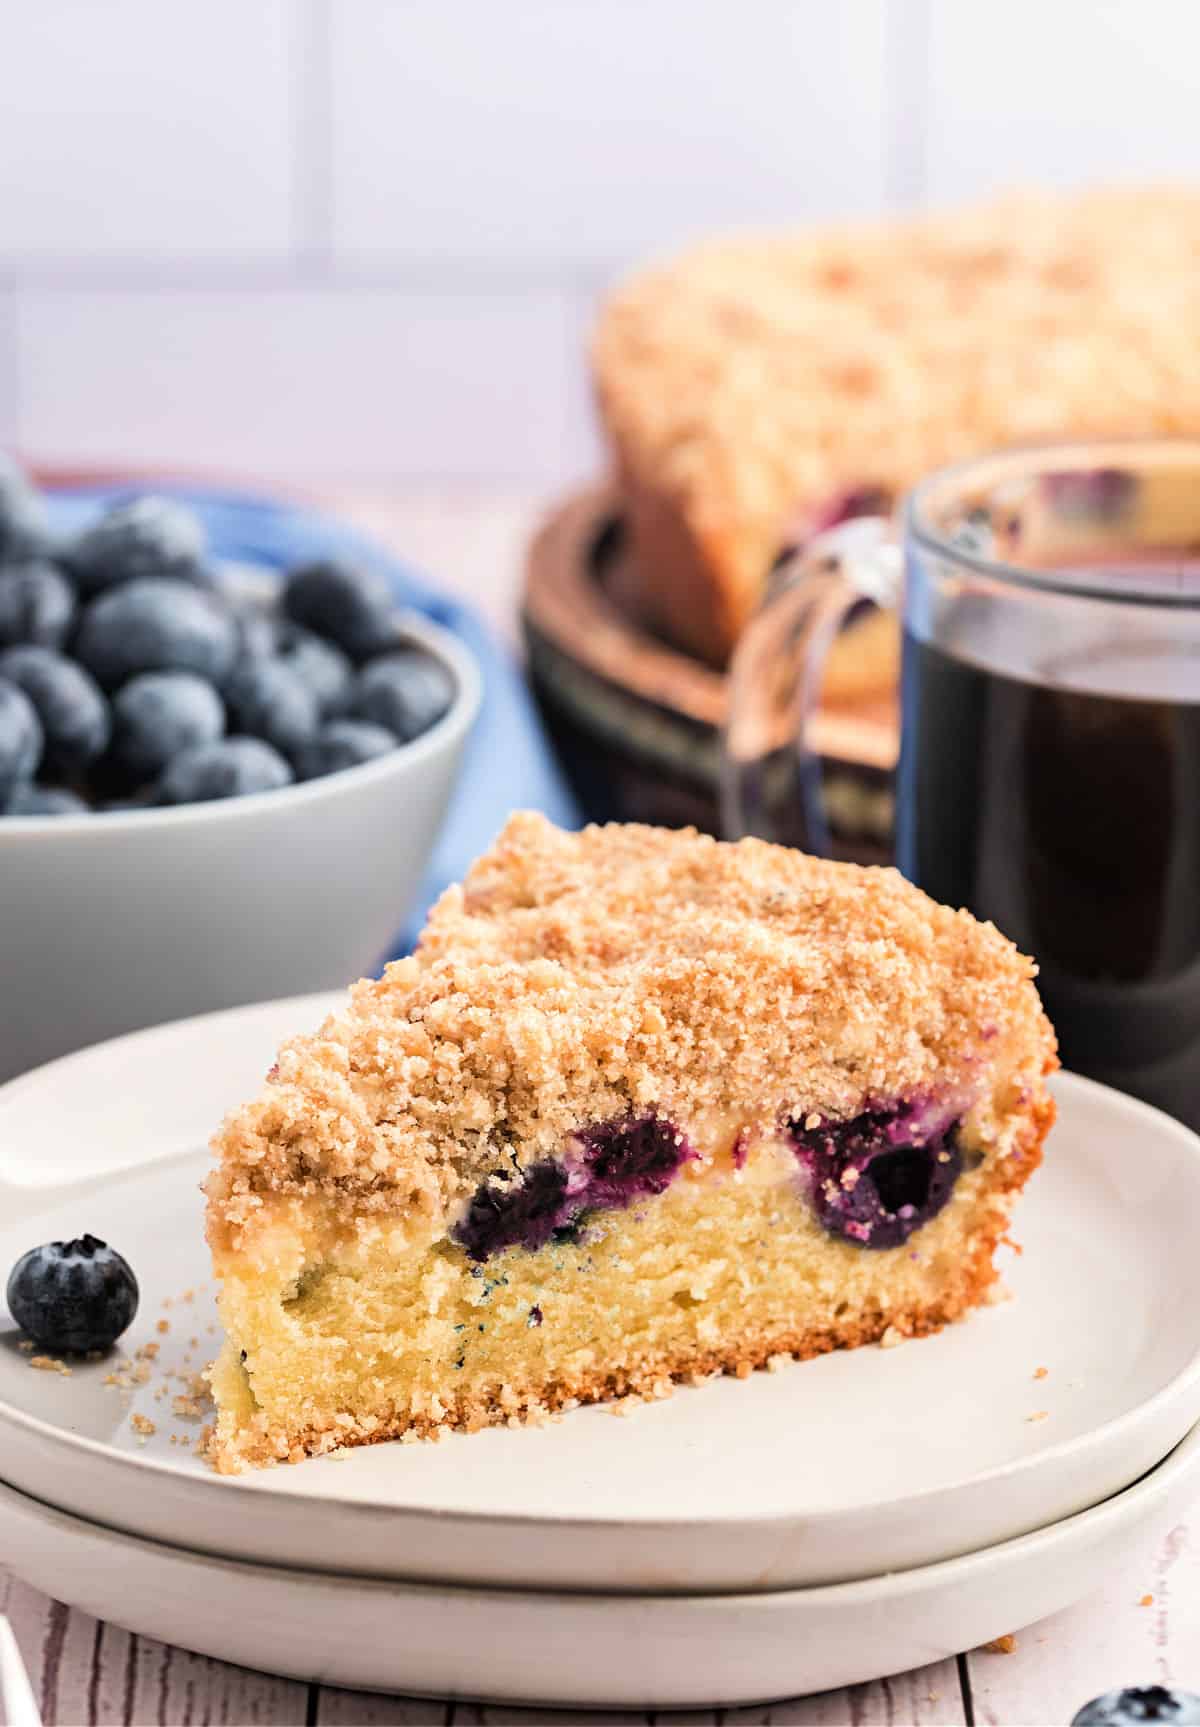 Slice of blueberry coffee cake on white plate.